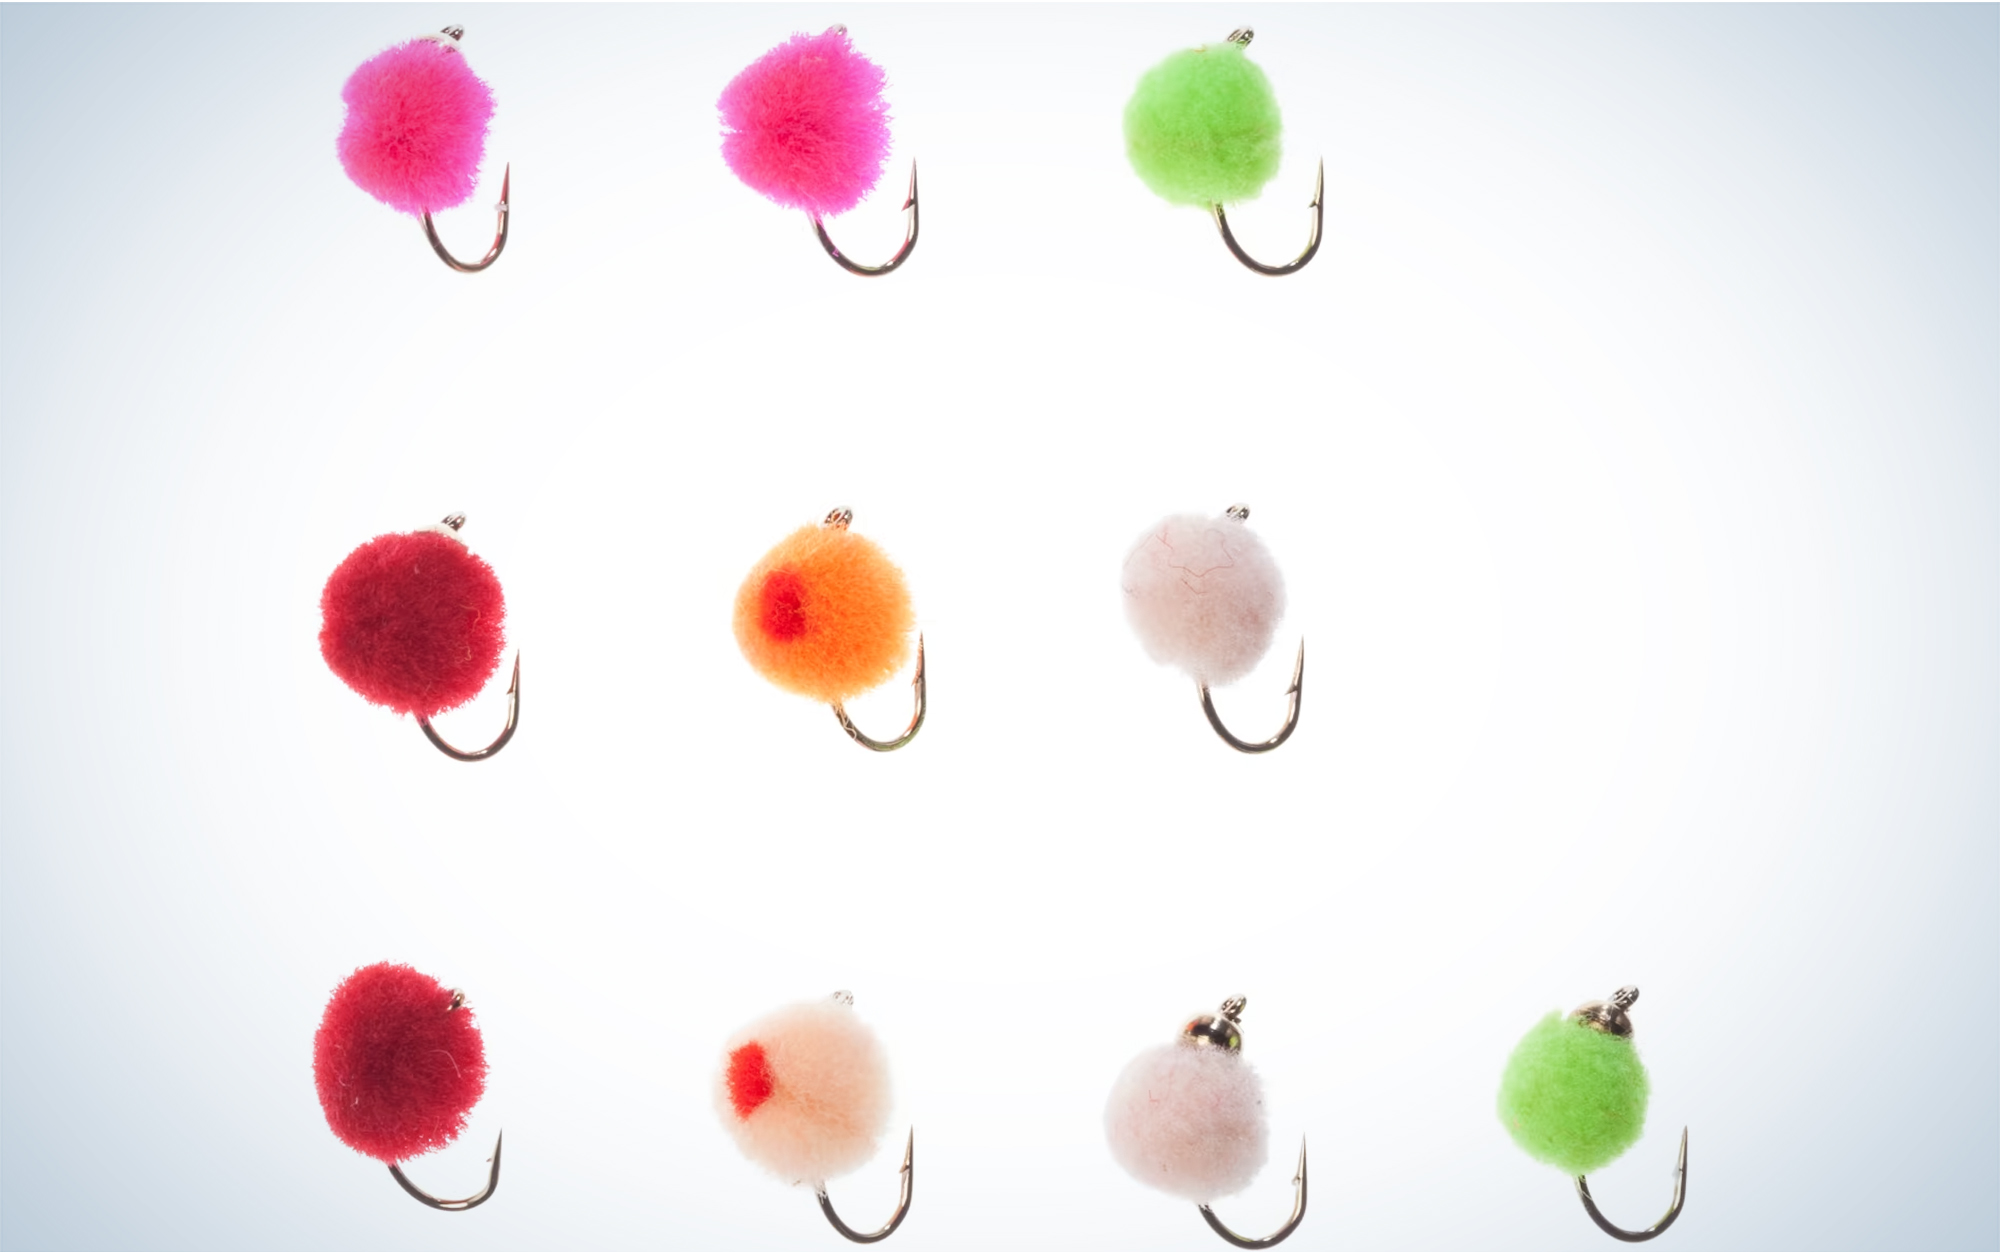 The salmon egg is one of the best flies for carp.